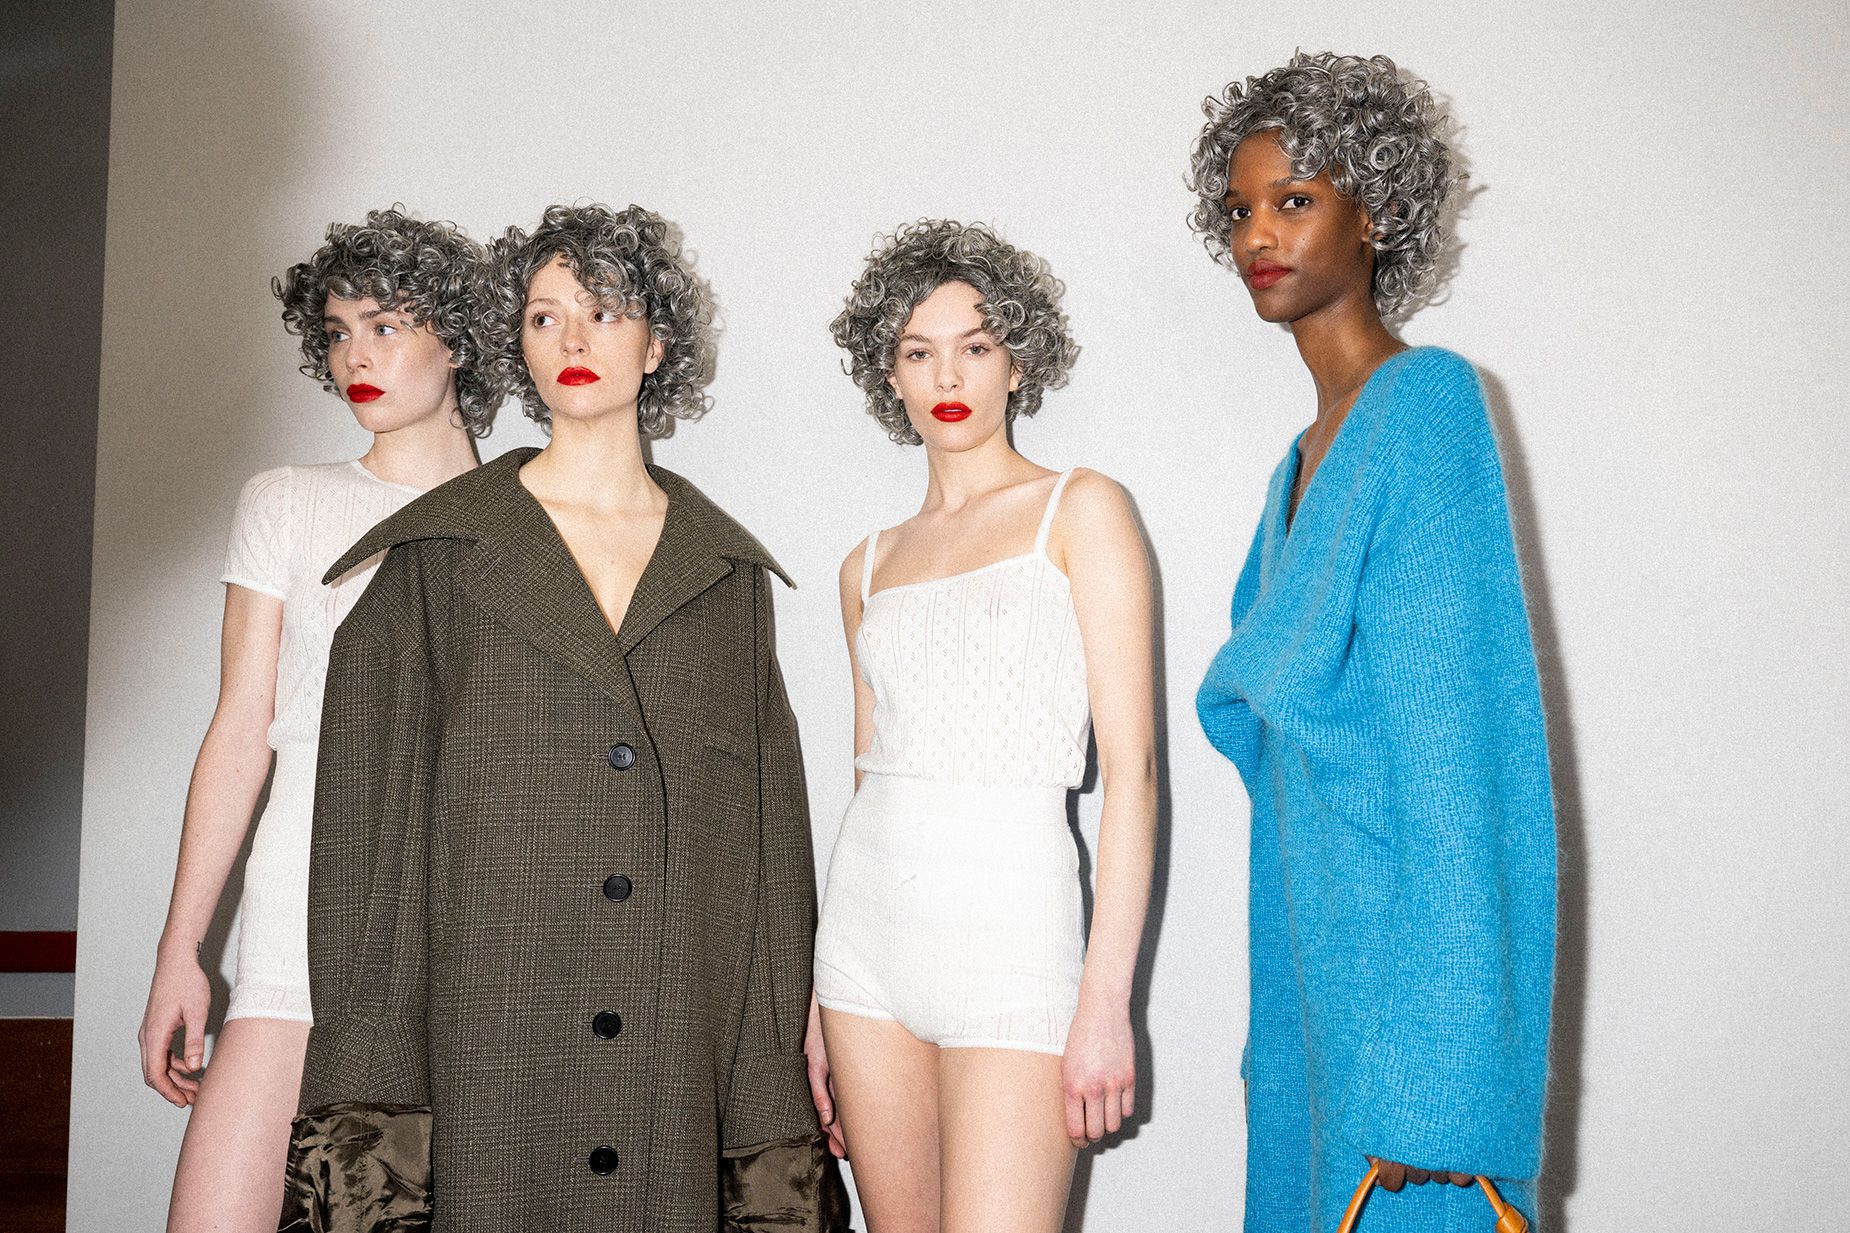 Coiled silver wigs were a mainstay at the JW Anderson show